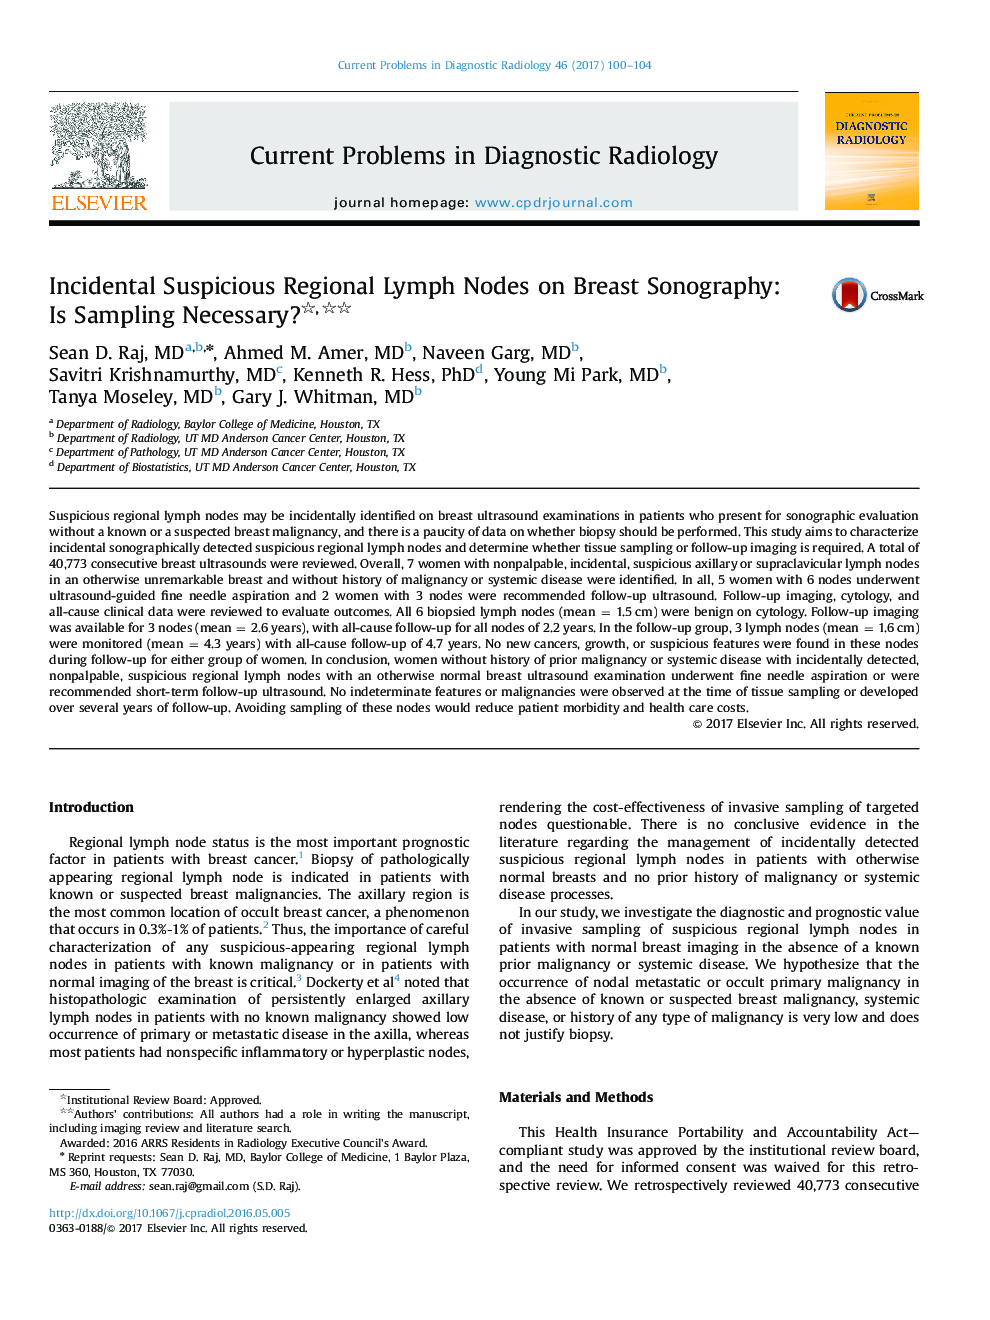 Incidental Suspicious Regional Lymph Nodes on Breast Sonography: Is Sampling Necessary?